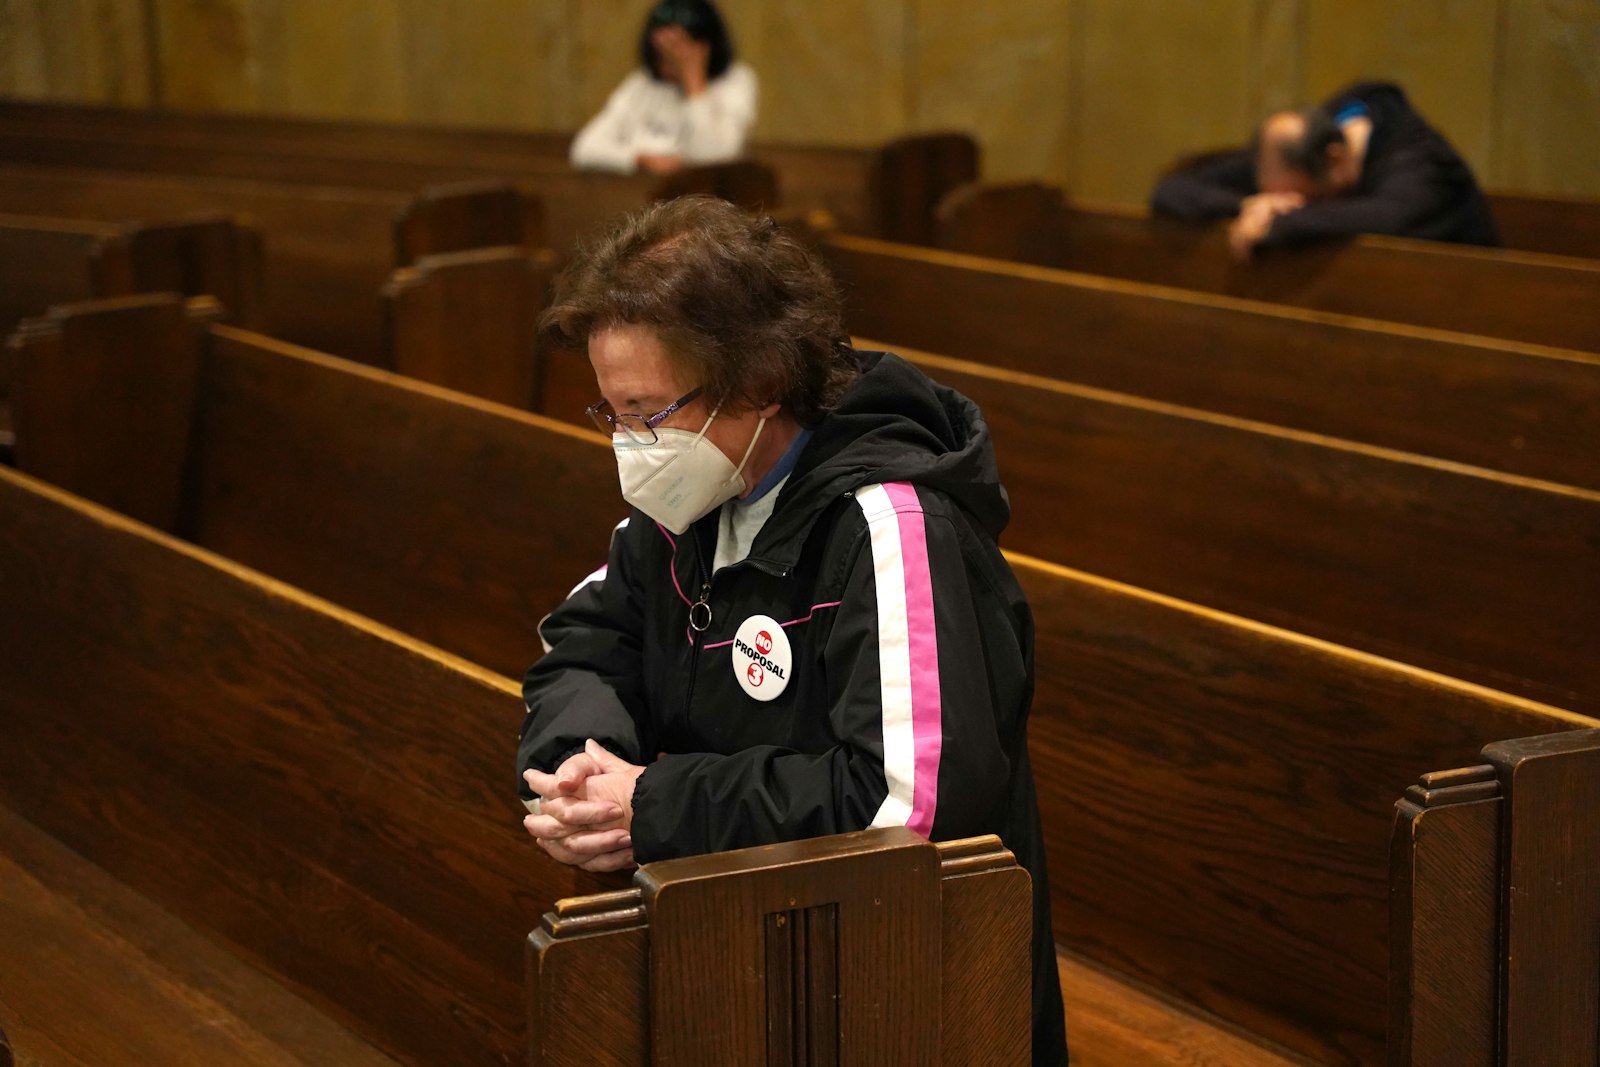 A woman wearing a "No on Proposal 3" button bows her head in prayer at the National Shrine of the Little Flower Basilica in Royal Oak.